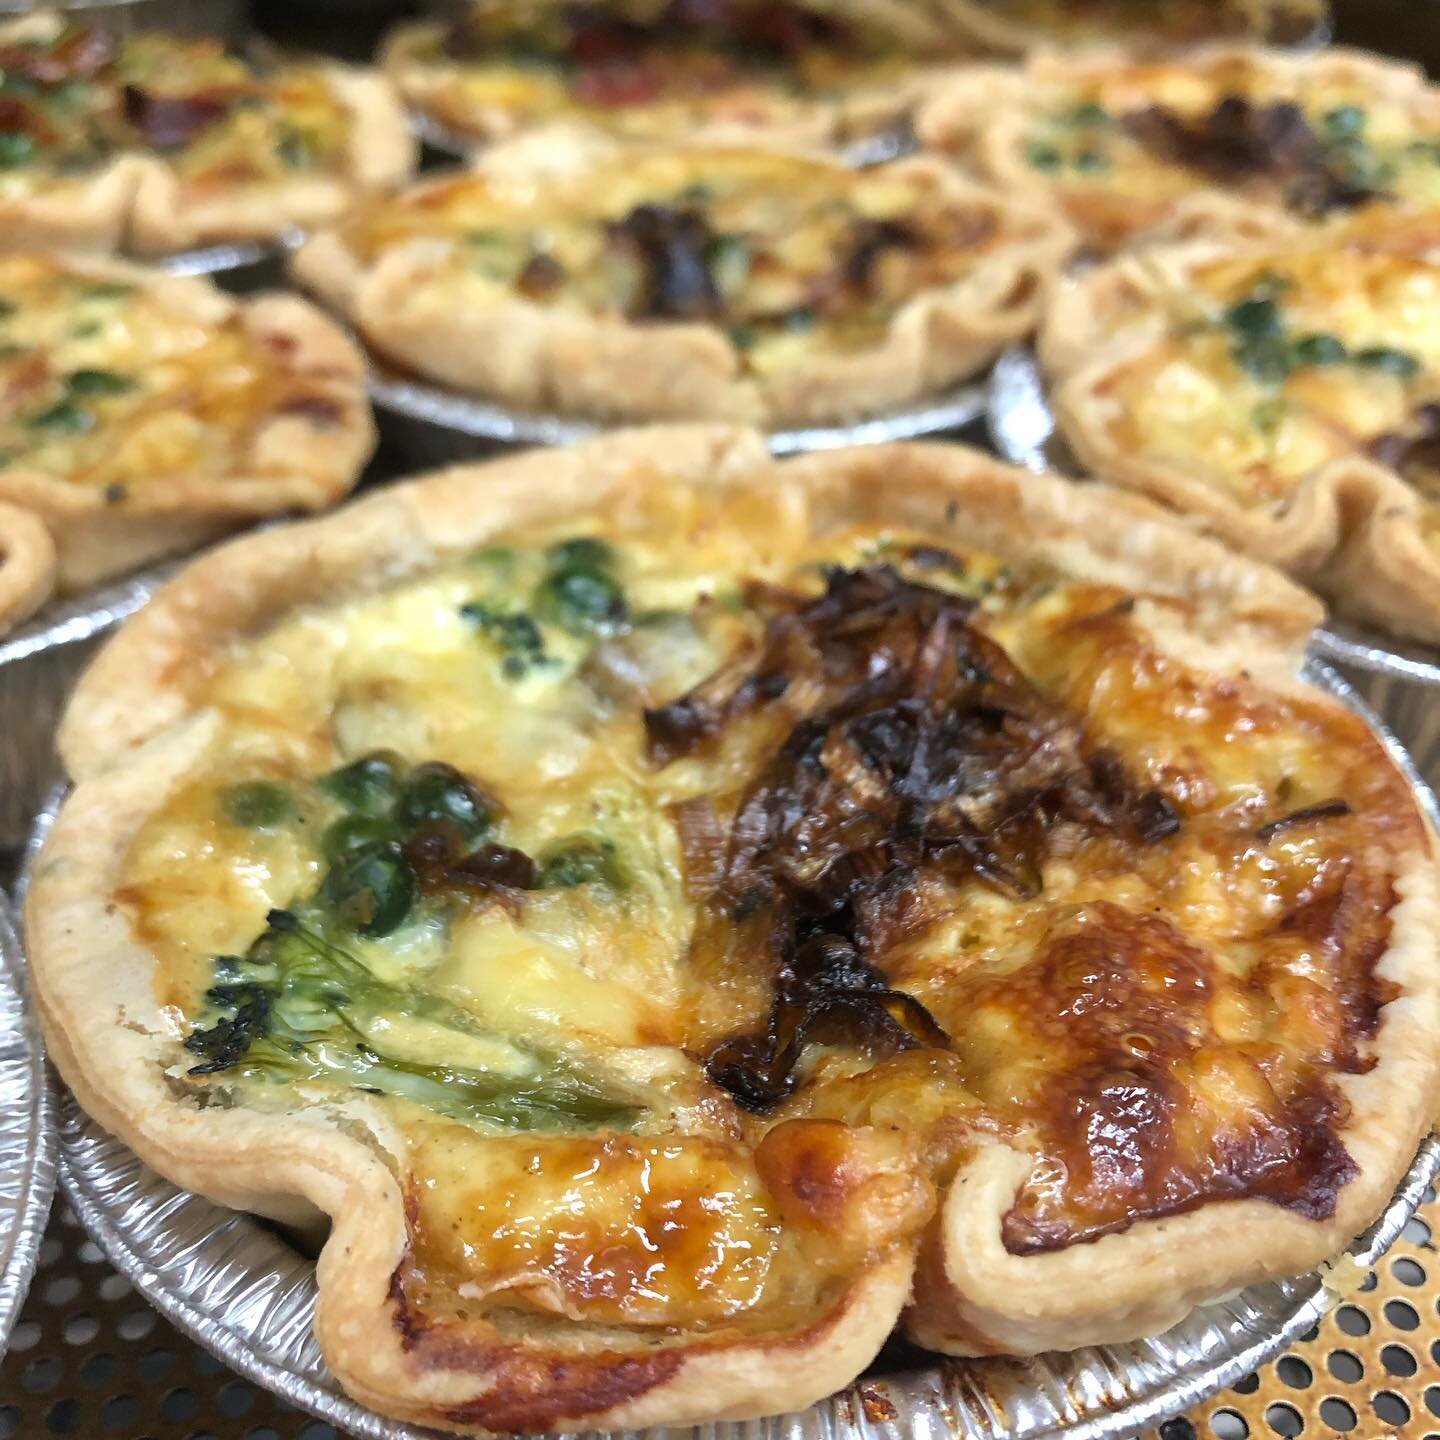 We have beautiful quiches in our homemade crust! We currently have a Vegetable Pesto and a Vegetable Chicken variety! 

We&rsquo;re open Wednesdays 10-5pm, and Thursdays through Saturdays 10-6pm! 

#robsgoodfood  #localbusiness #eastyork #eastend #ea